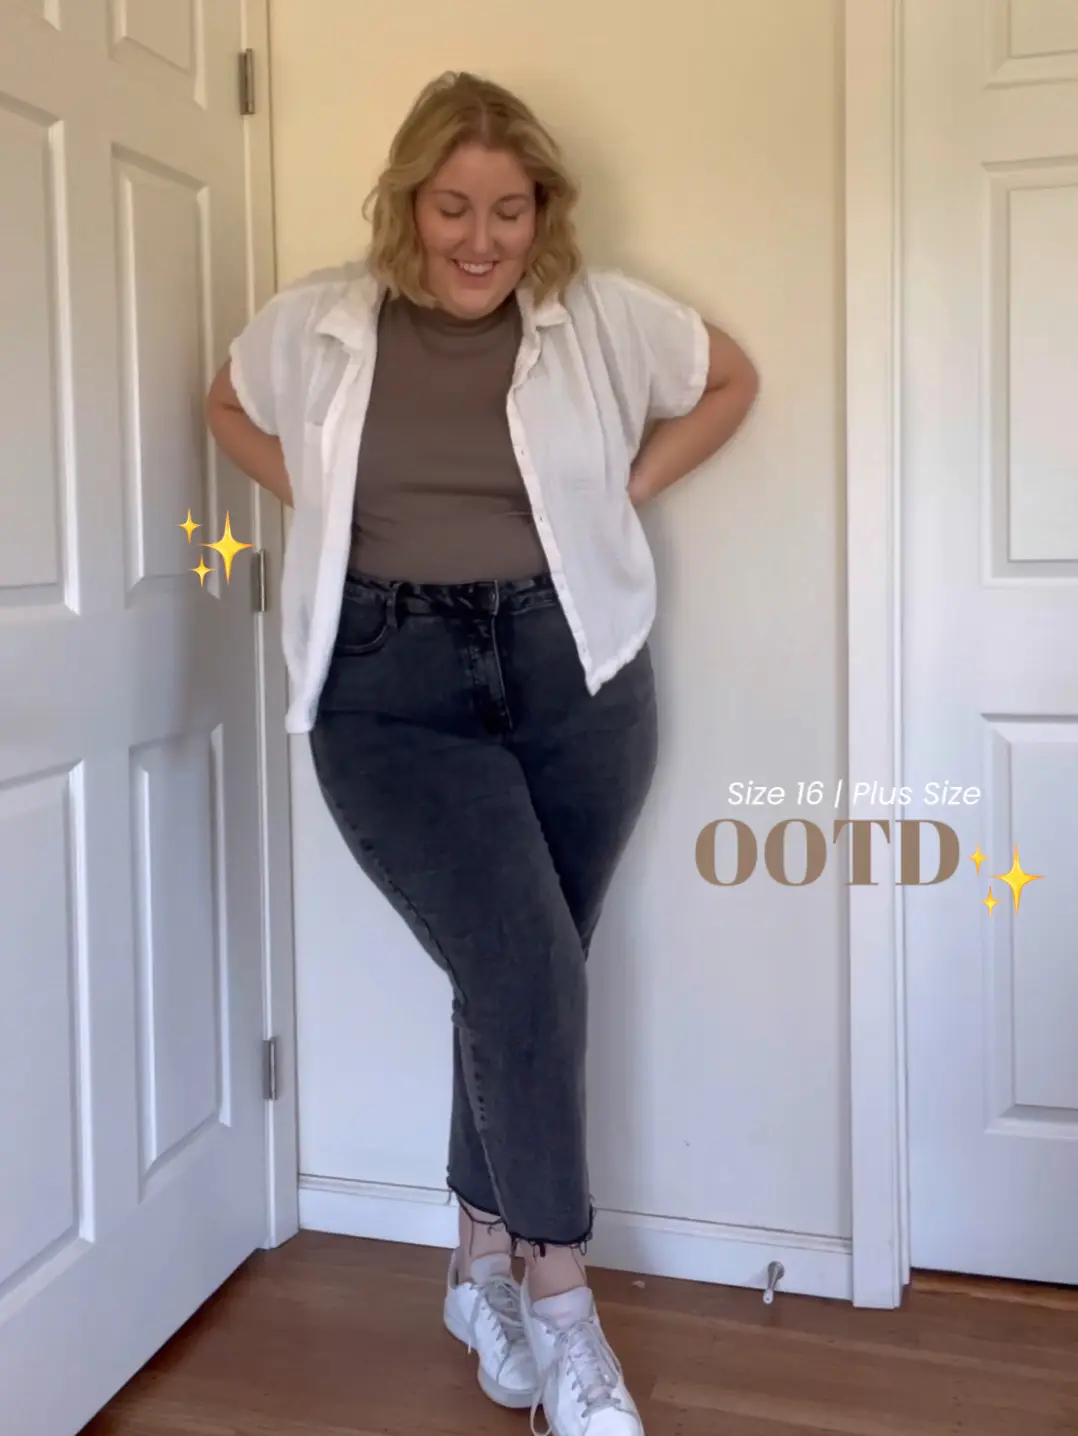 Jumpsuit Perfect For Every Occasion -  💋 Plus Size  Fashion + Beauty & Lifestyle